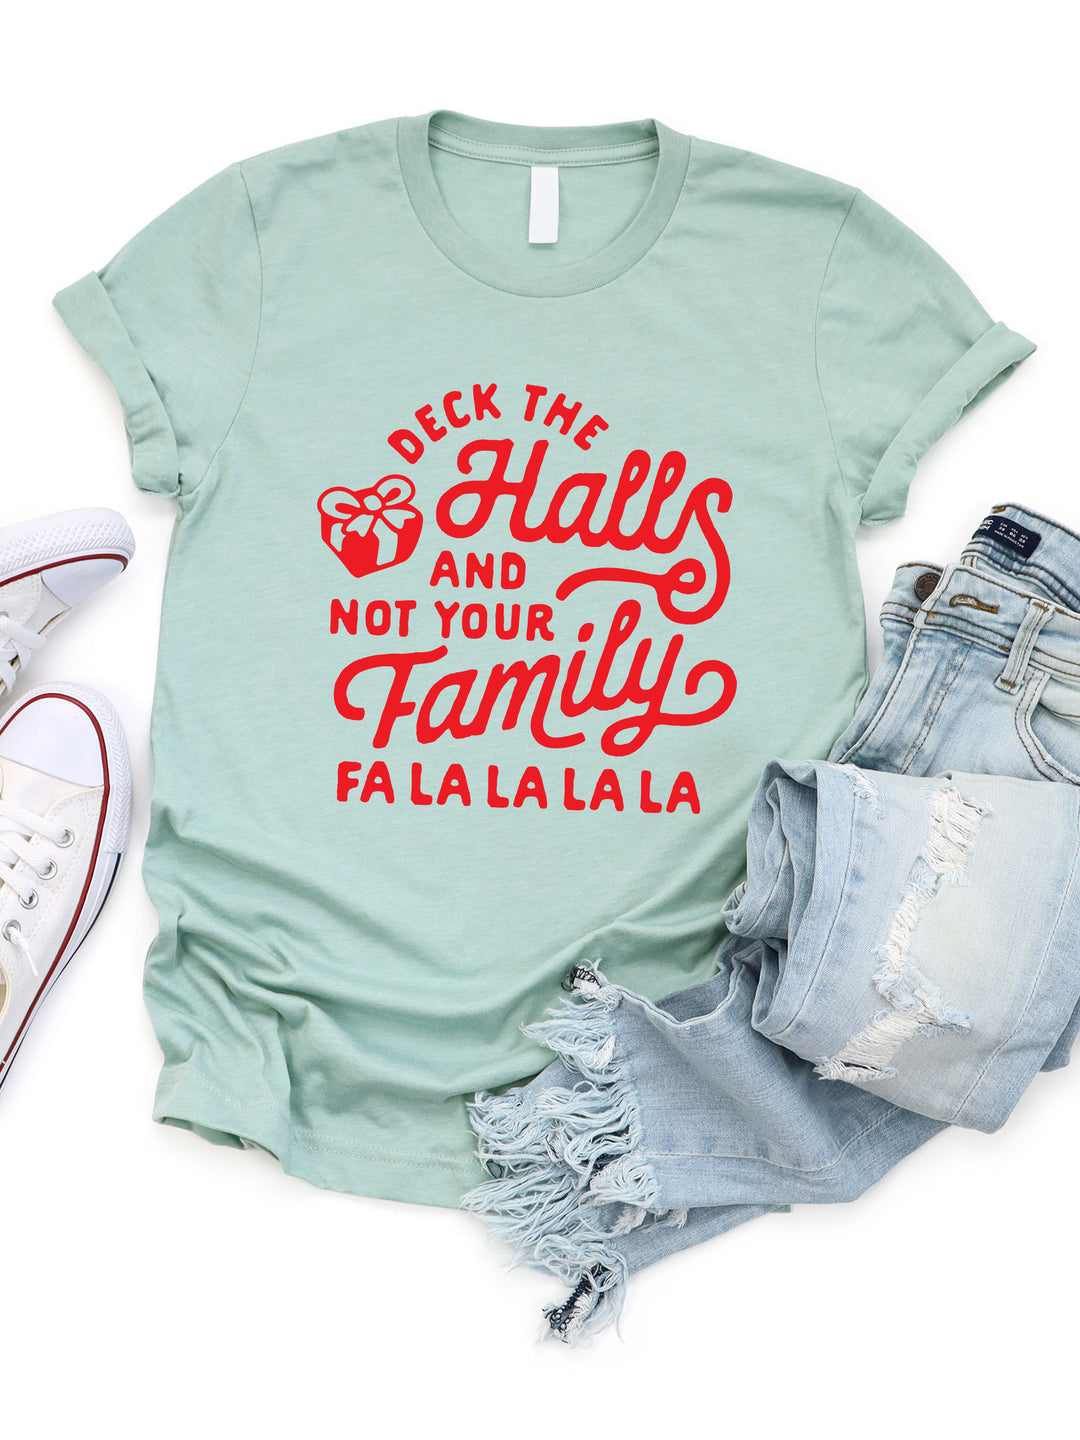 Deck The Halls & Not Your Family Graphic Tee